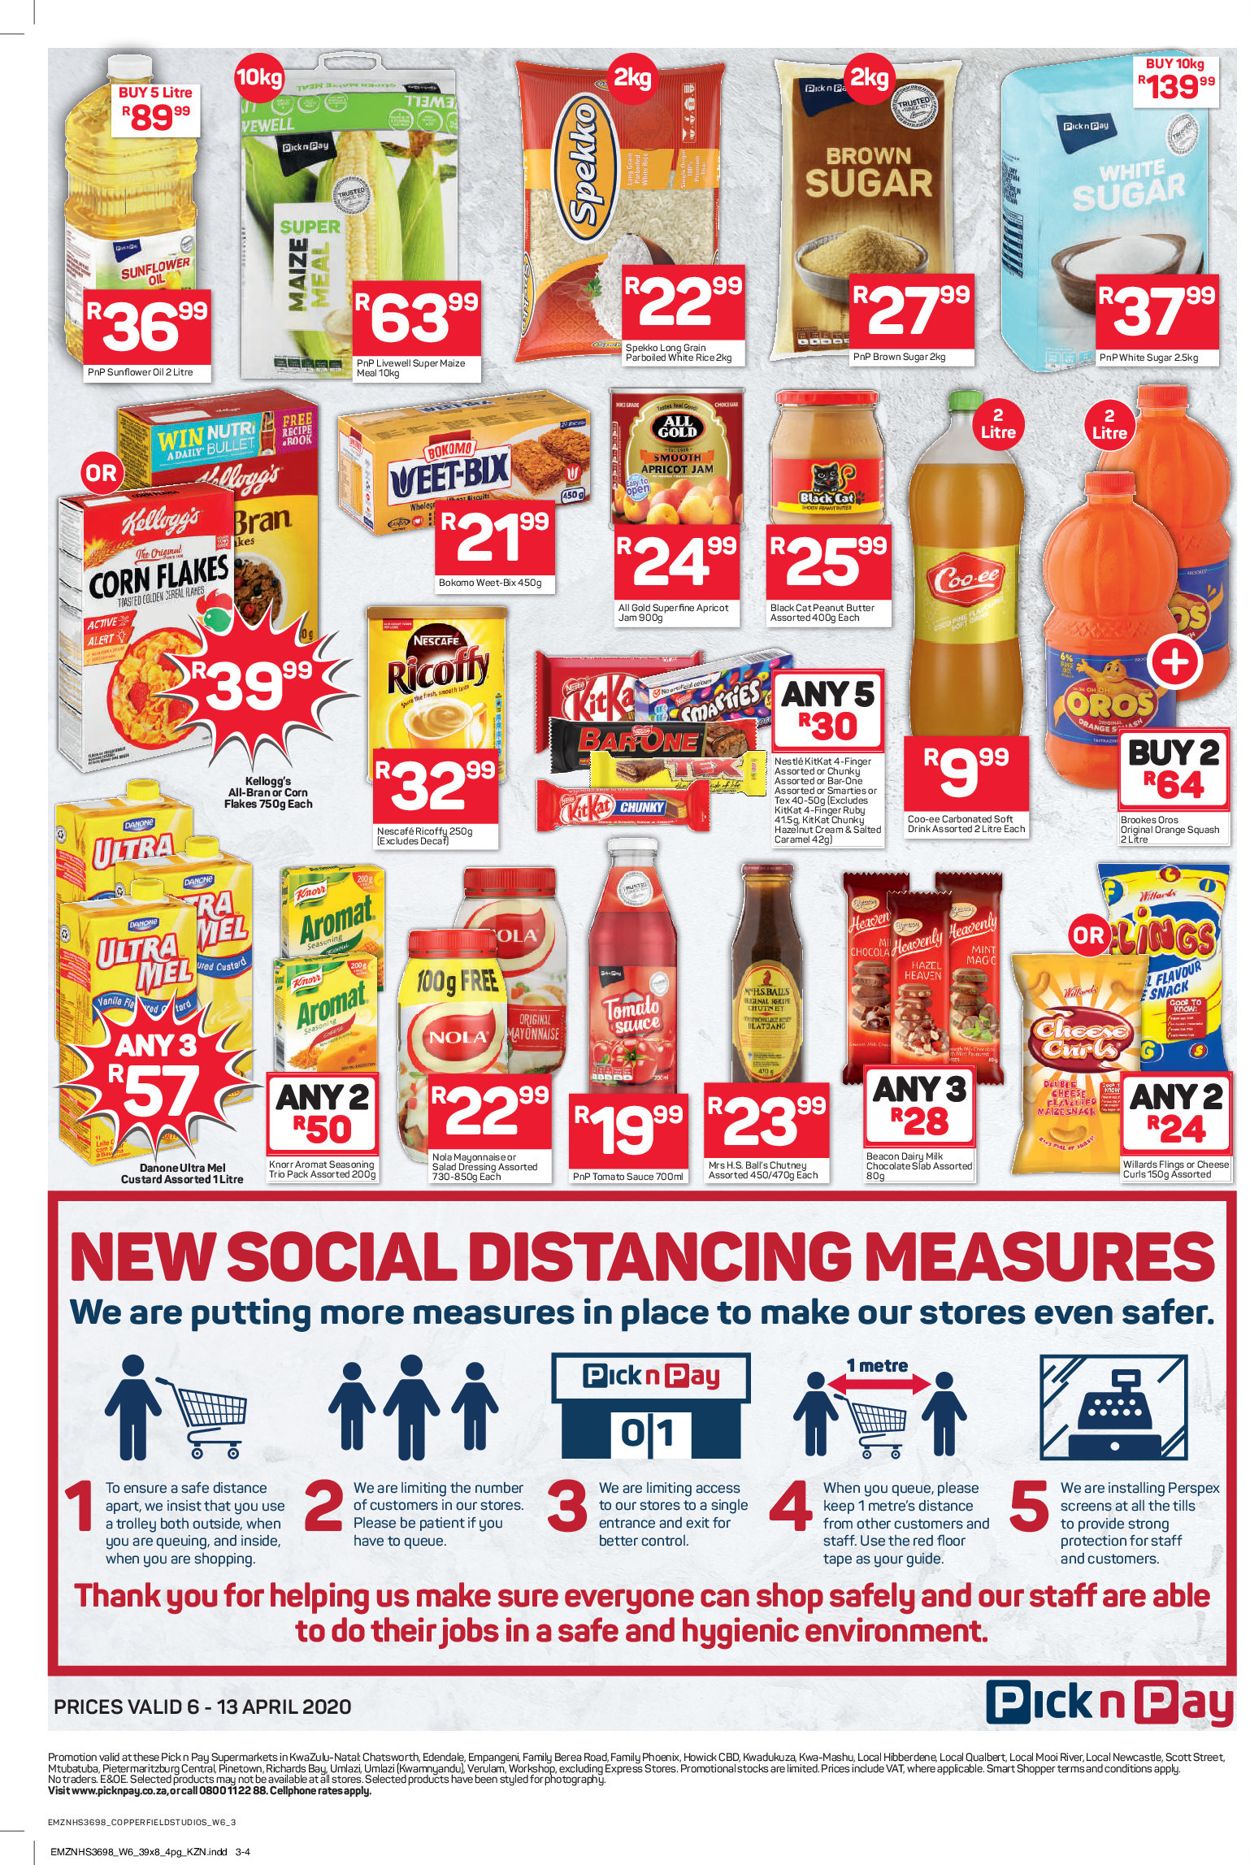 Pick n Pay Catalogue - 2020/04/06-2020/04/13 (Page 3)